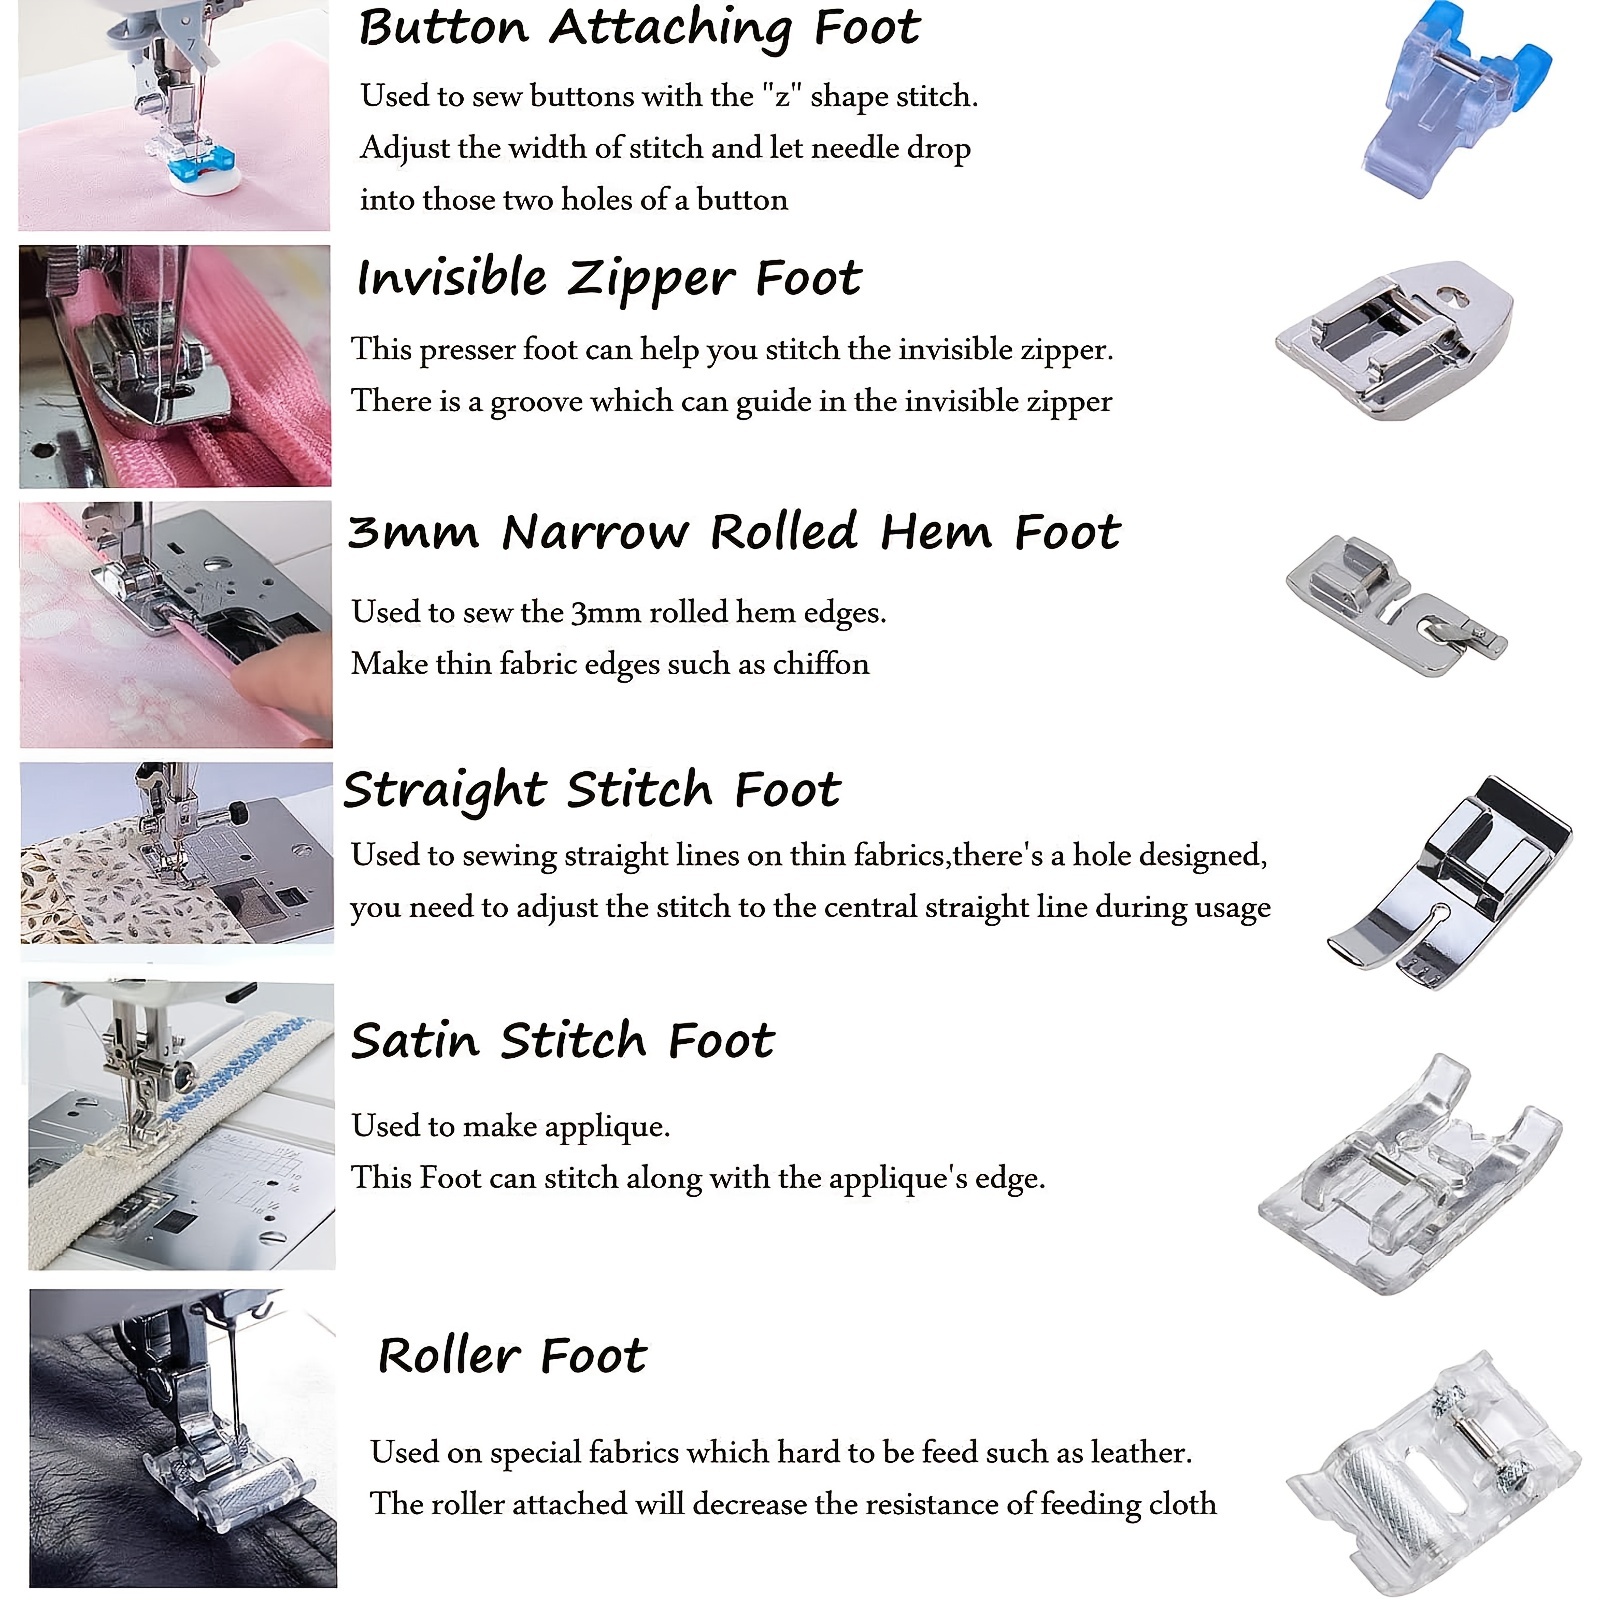  12 Pieces Sewing Machine Presser Foot Set Sewing Machine Spare  Parts Accessories Multifunctional Sewing Foot Presser for Most Sewing  Machines : Arts, Crafts & Sewing